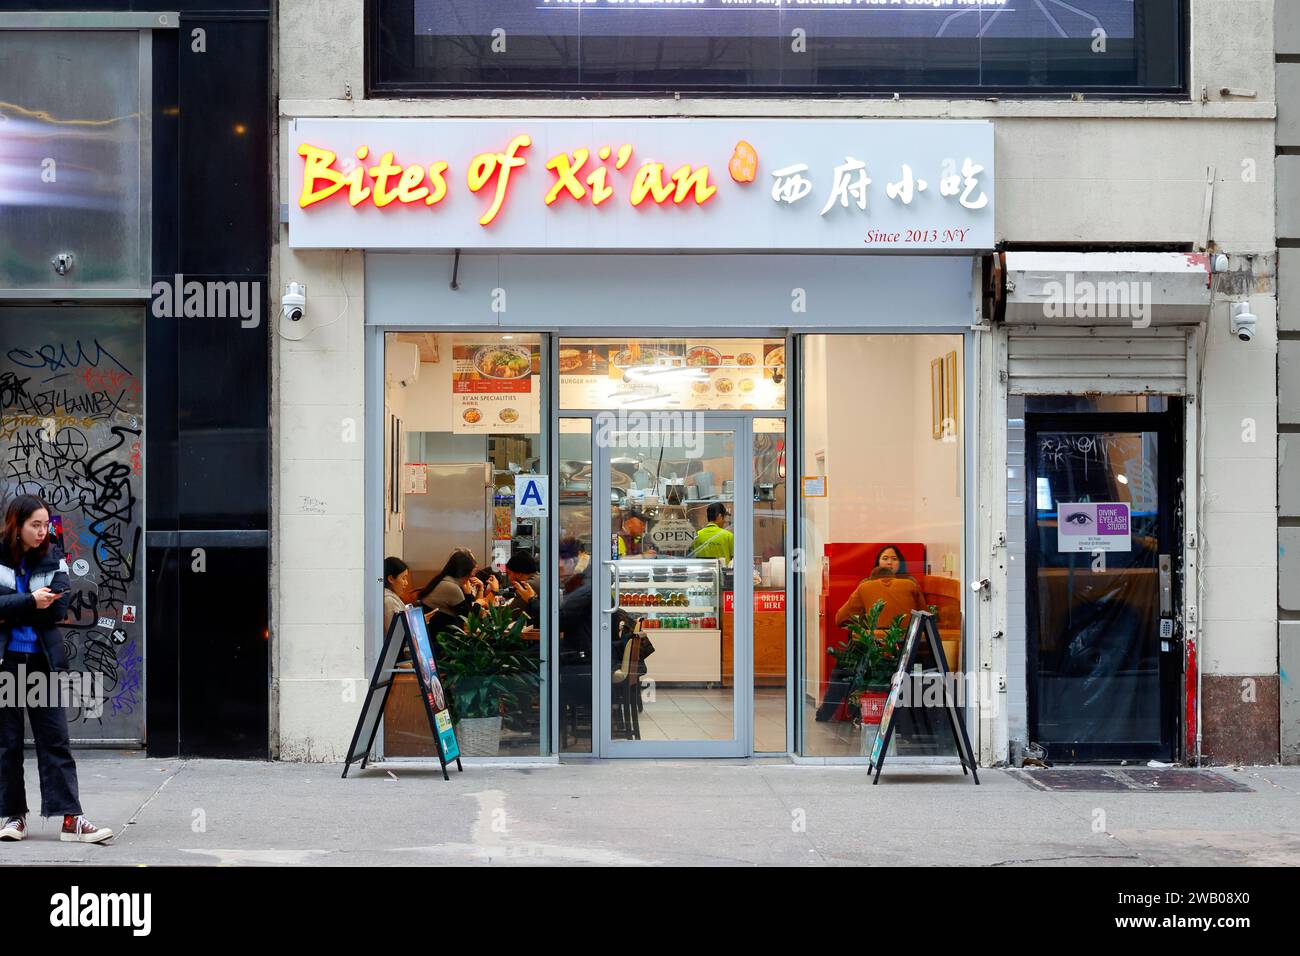 Bites Of Xi'an 西府小吃, 884 6th Ave, New York, NYC storefront of a  Shaanxi Chinese restaurant in Midtown Manhattan. Stock Photo